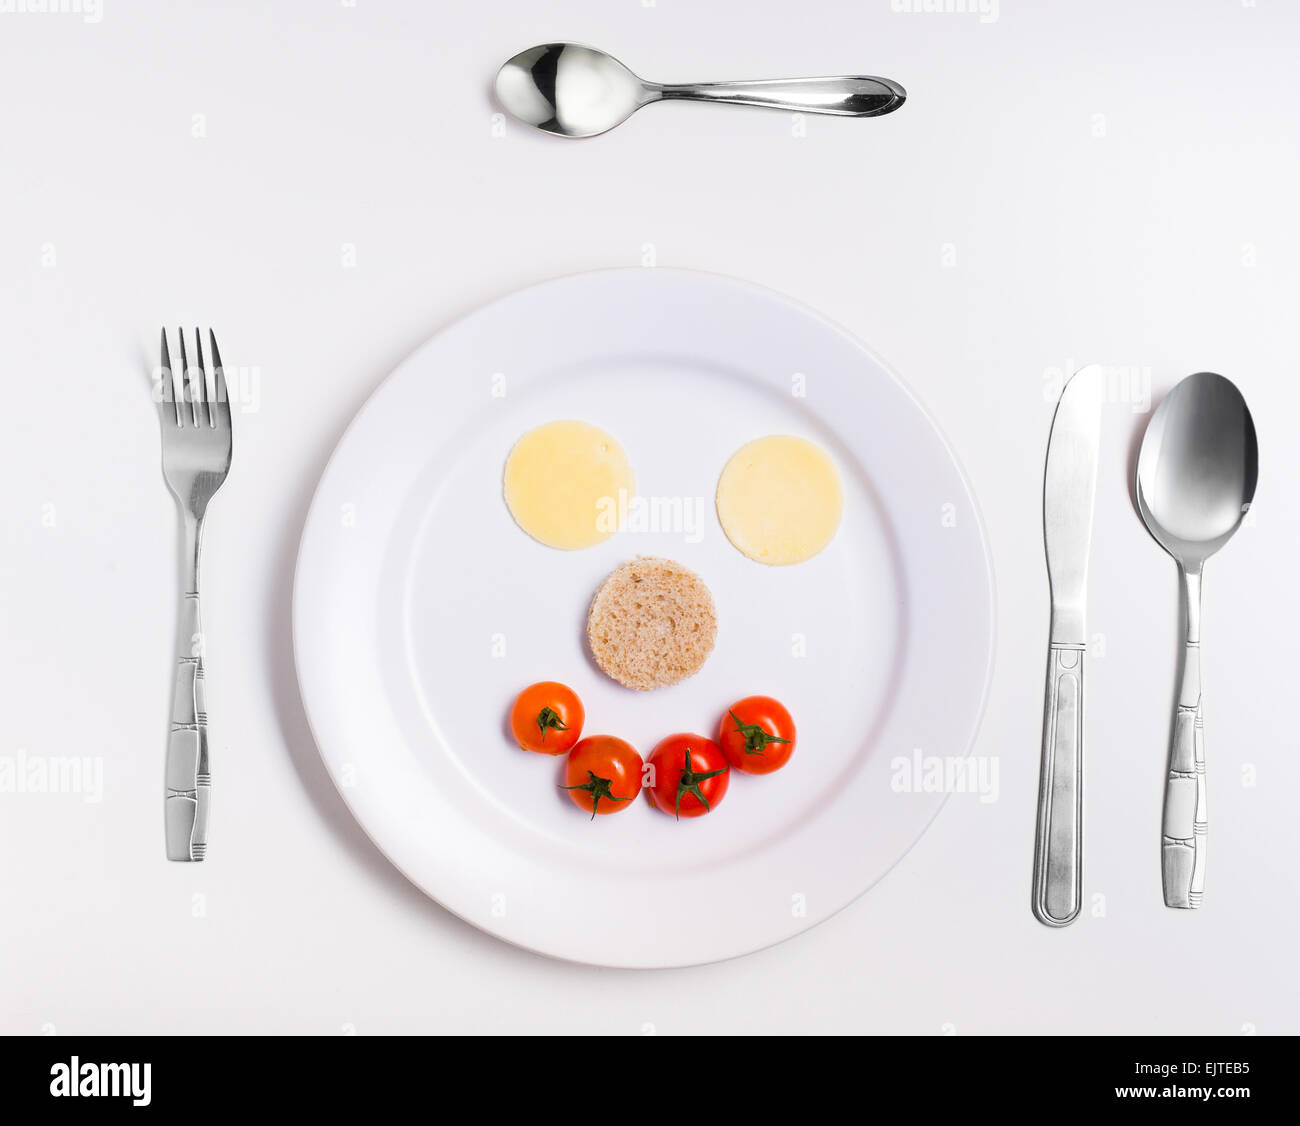 fun emoticon food, made from cheese, tomatoes, bread on a plate with cutlery Stock Photo